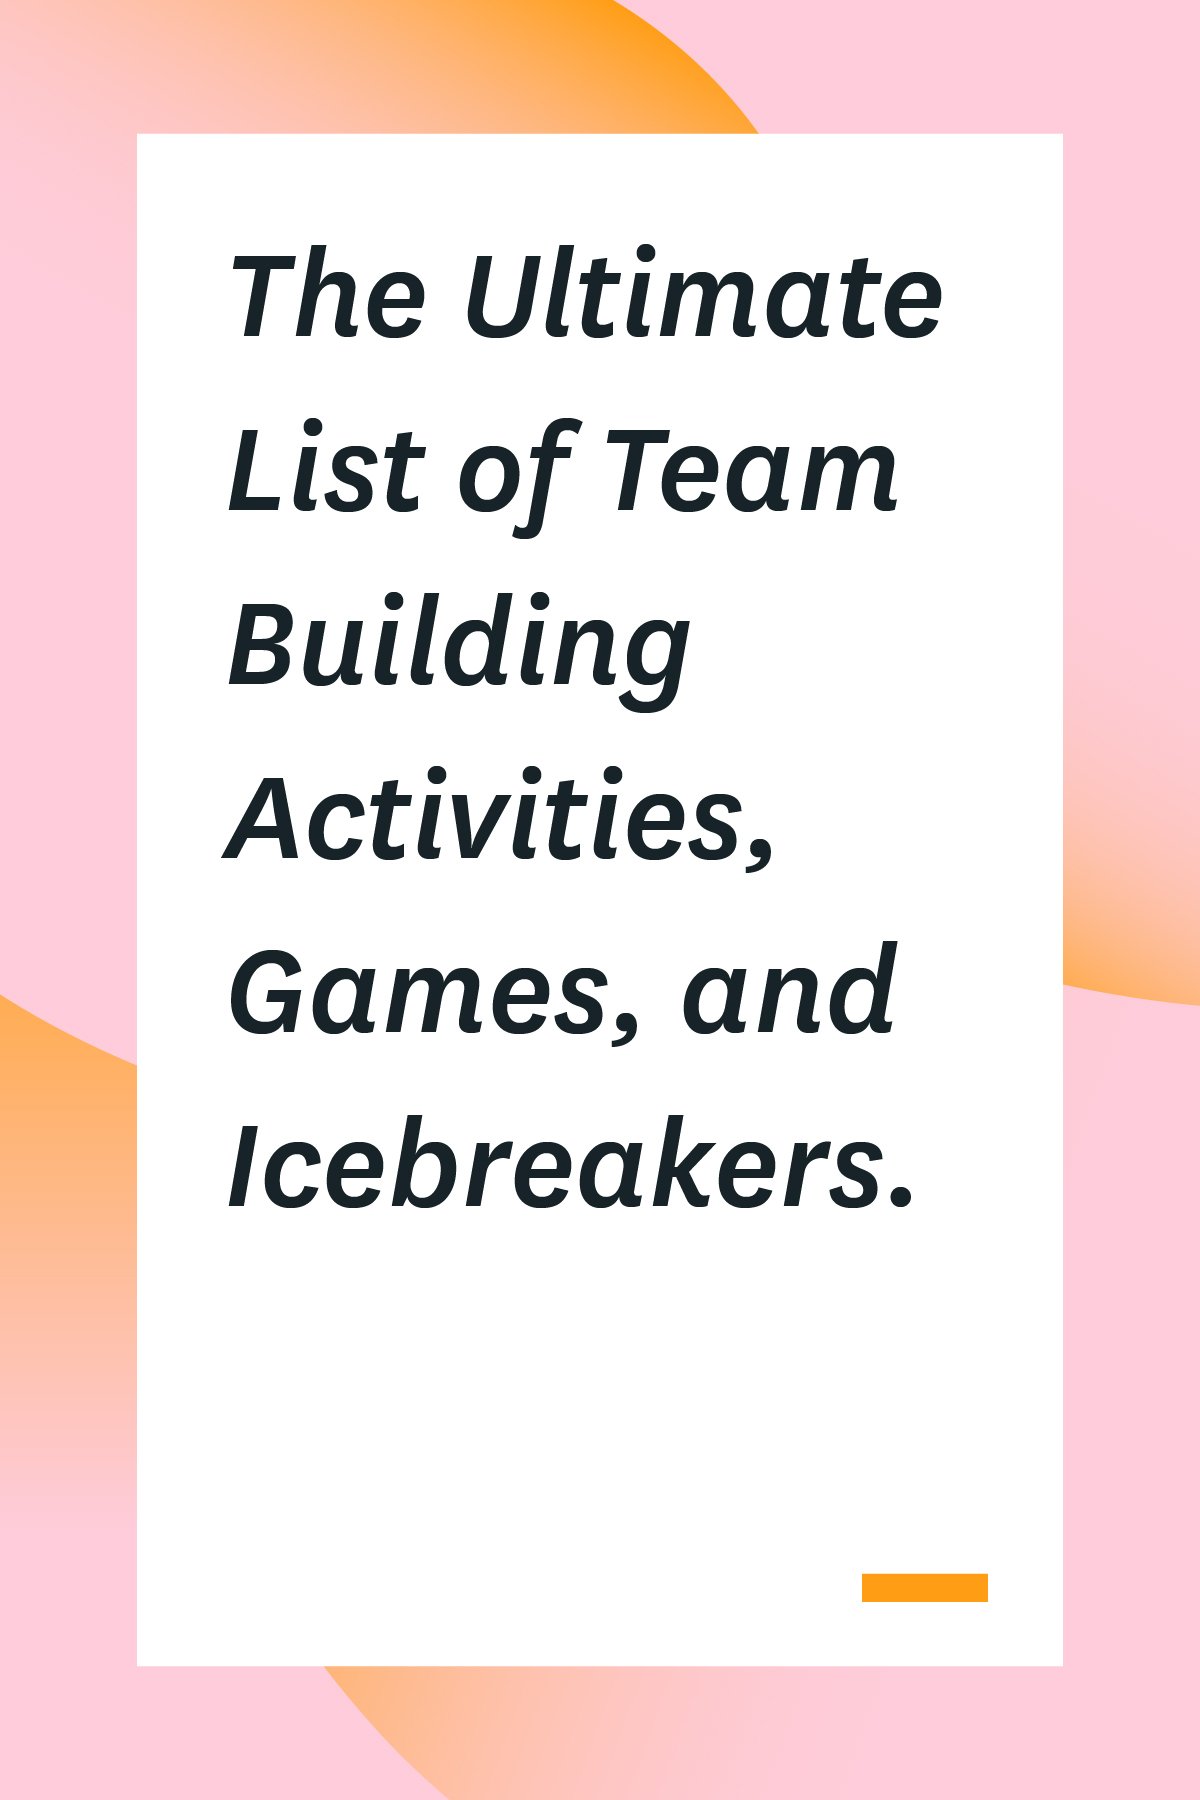 Team building games don't have to feel cheesy. In fact, team building activities and icebreakers can be the perfect way to help your team bond and problem solve better together. Here's an epic list of team building games to get you started. #teambuilding #icebreakers #remoteteam